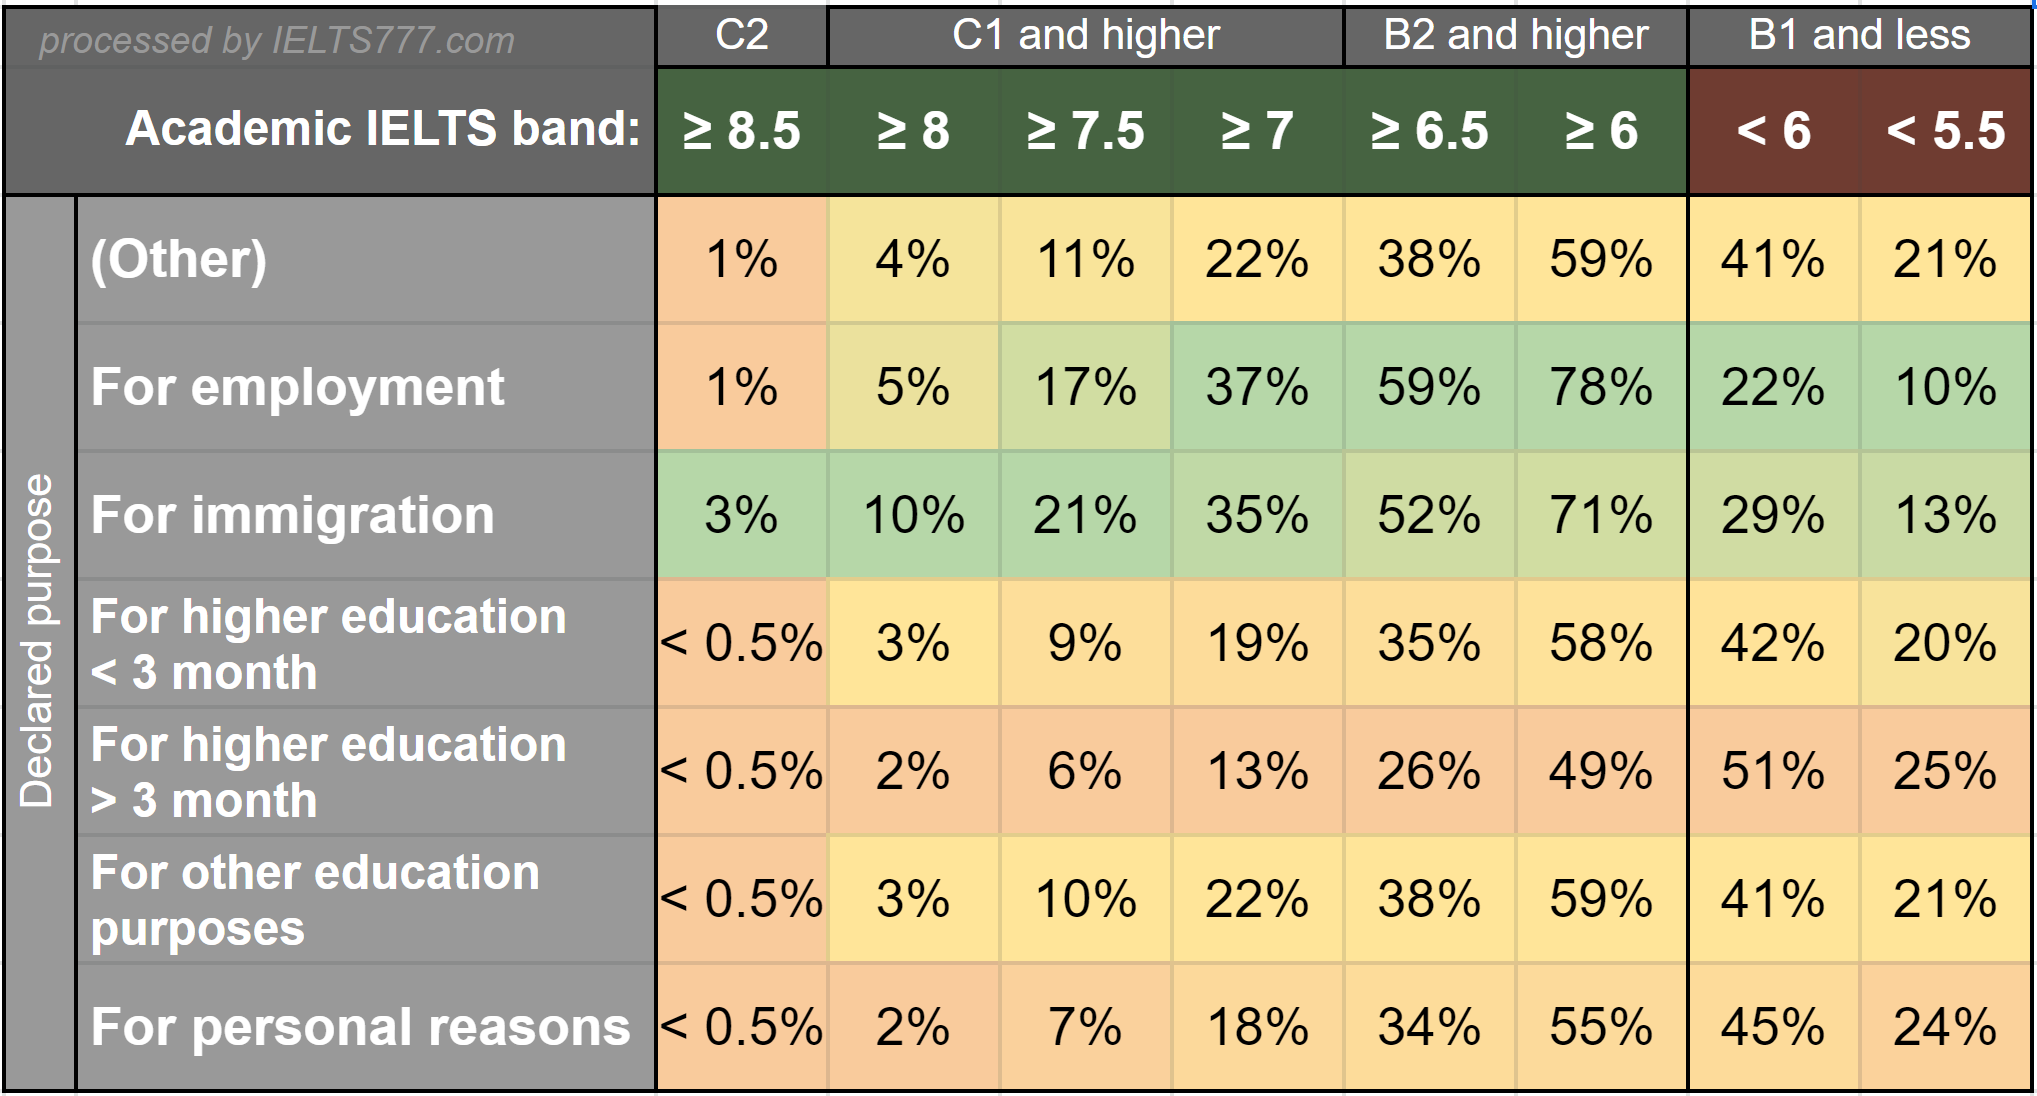 Academic IELTS score statistics: Band distribution by declared purpose